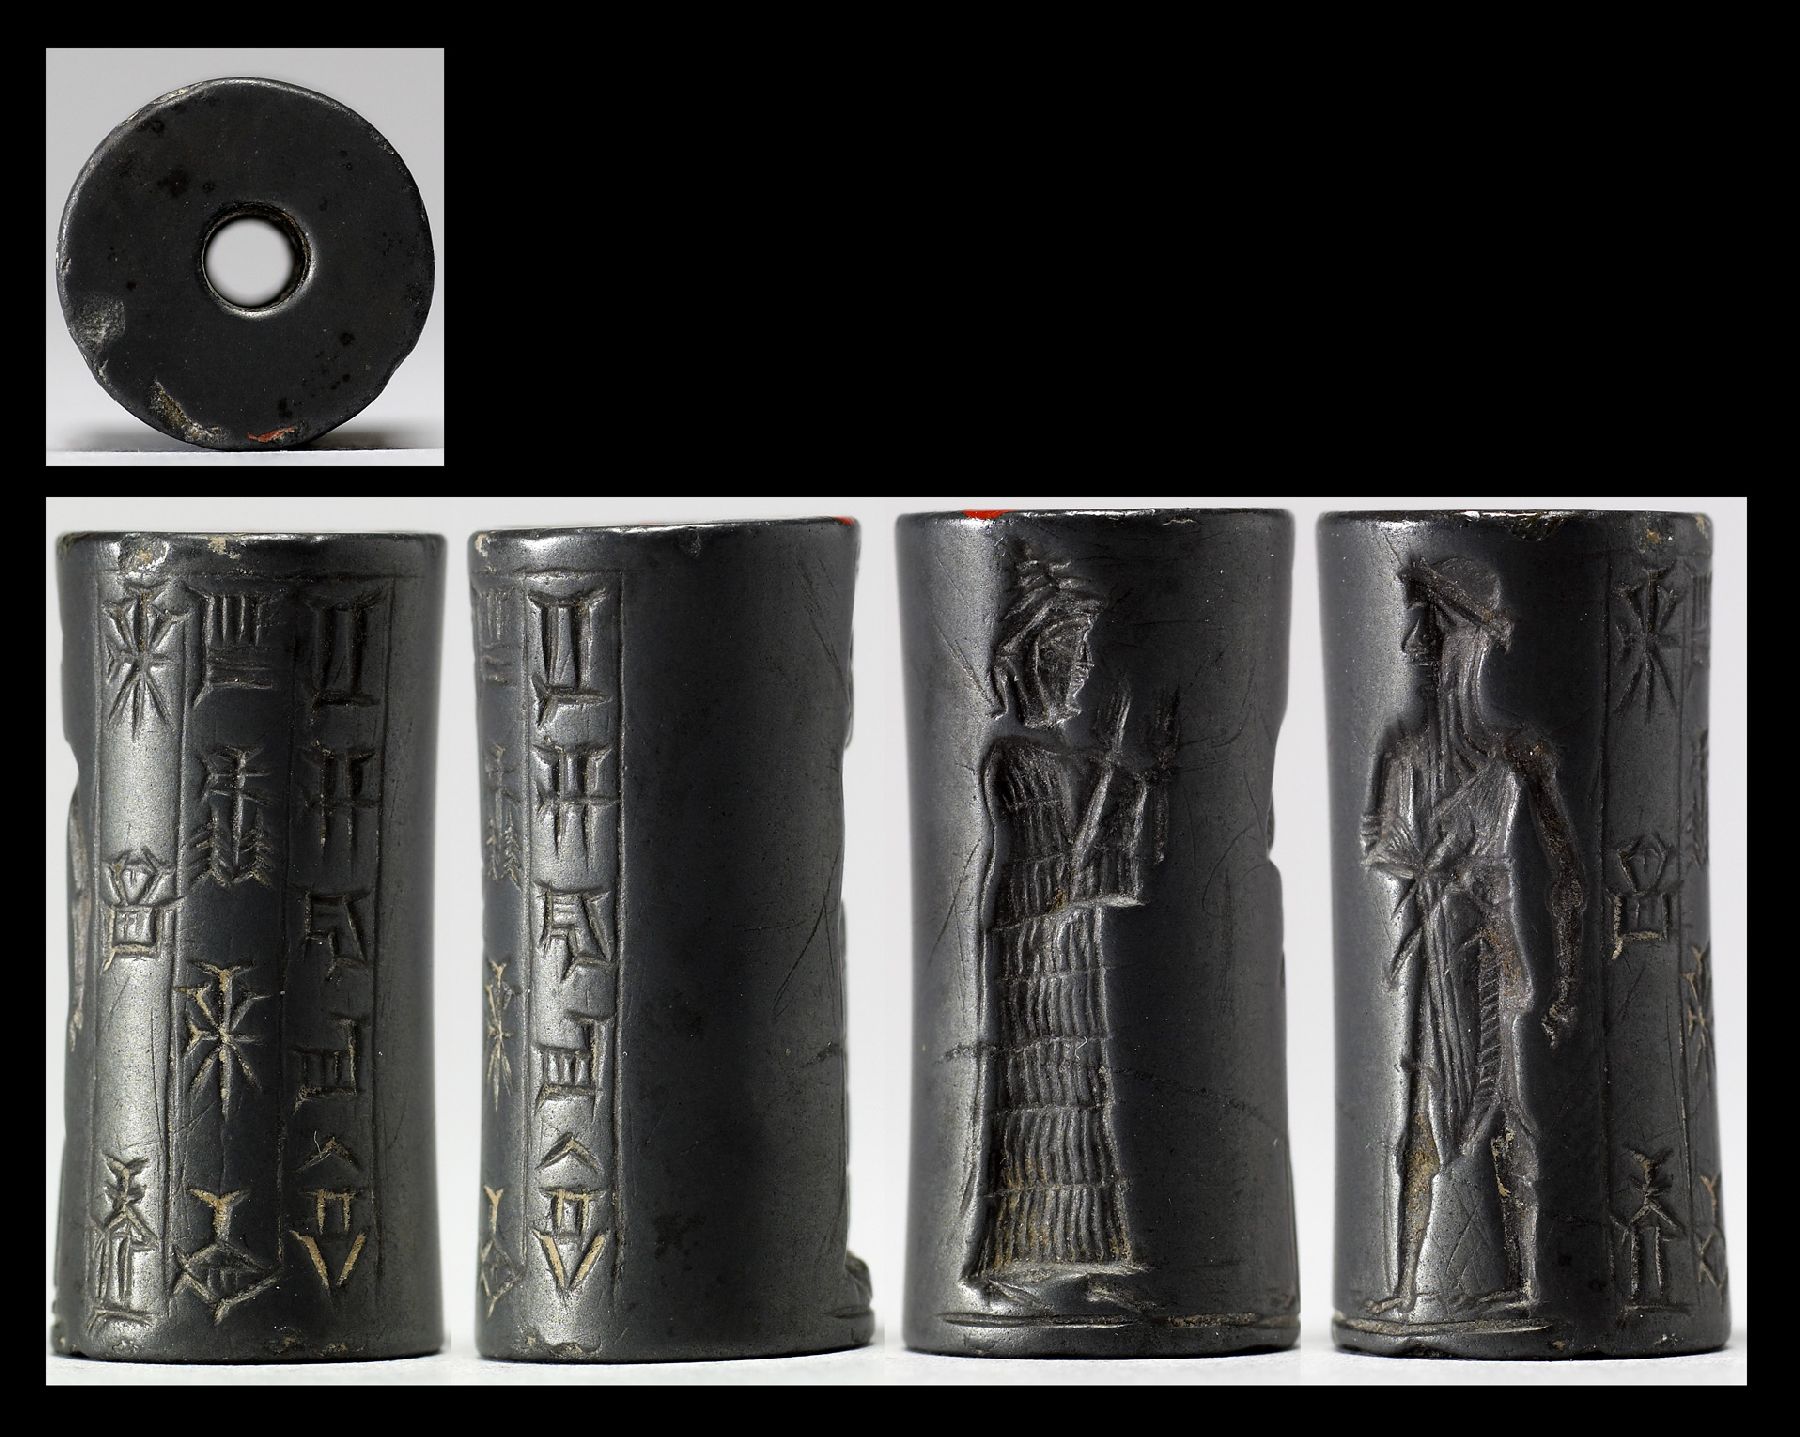 Image for Cylinder Seal with a Presentation Scene and an Inscription